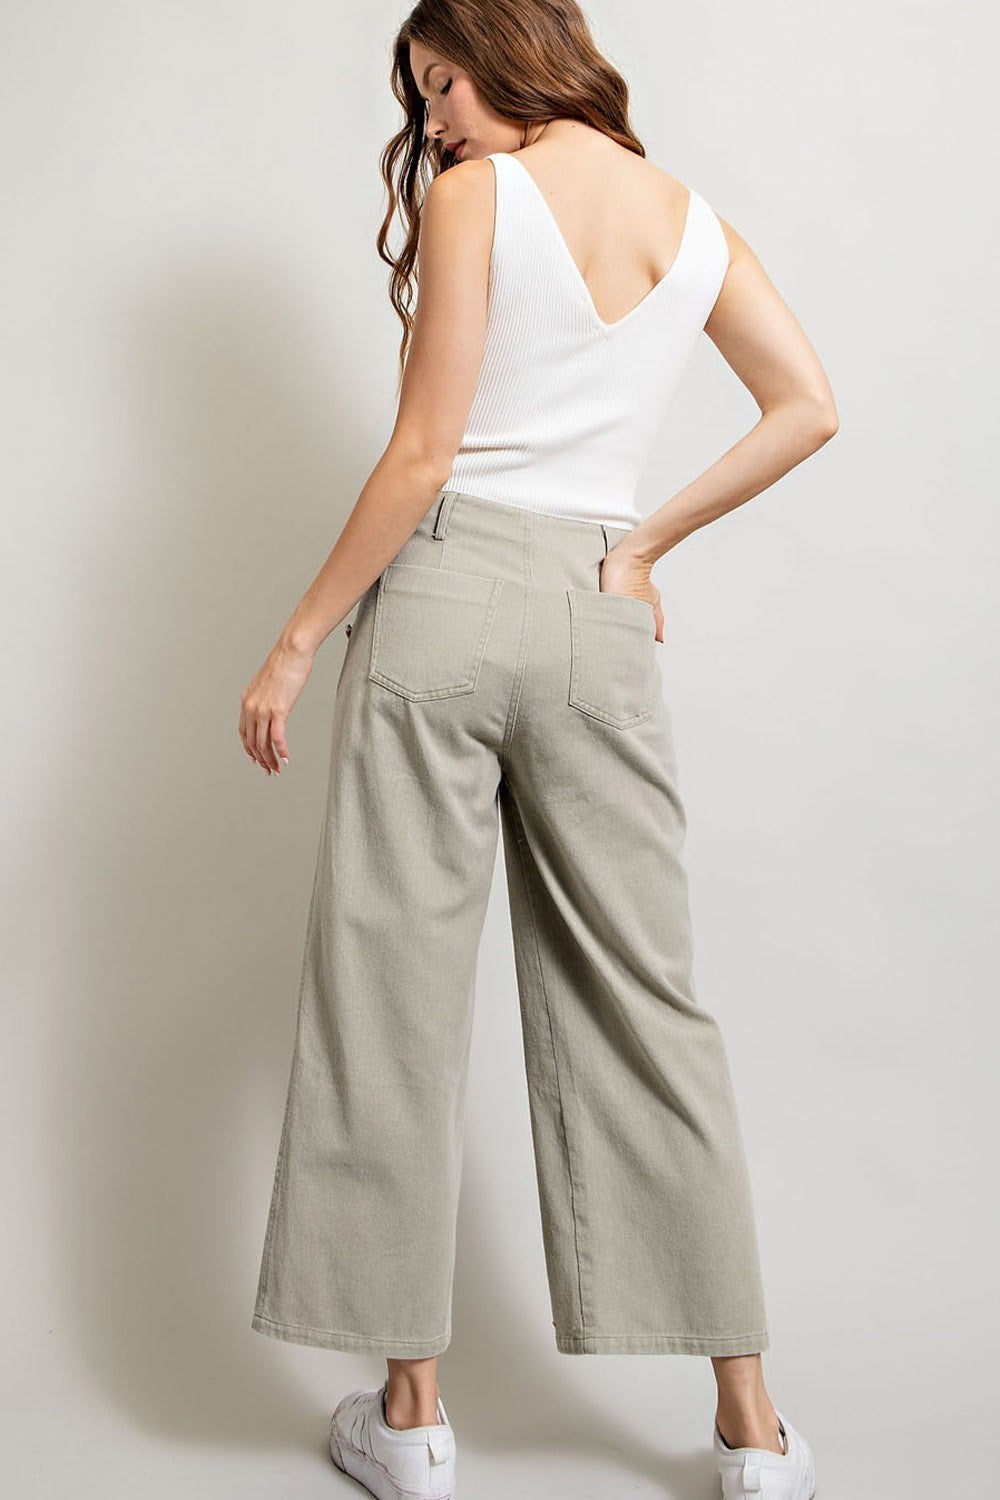 All Put Together Cropped Pants